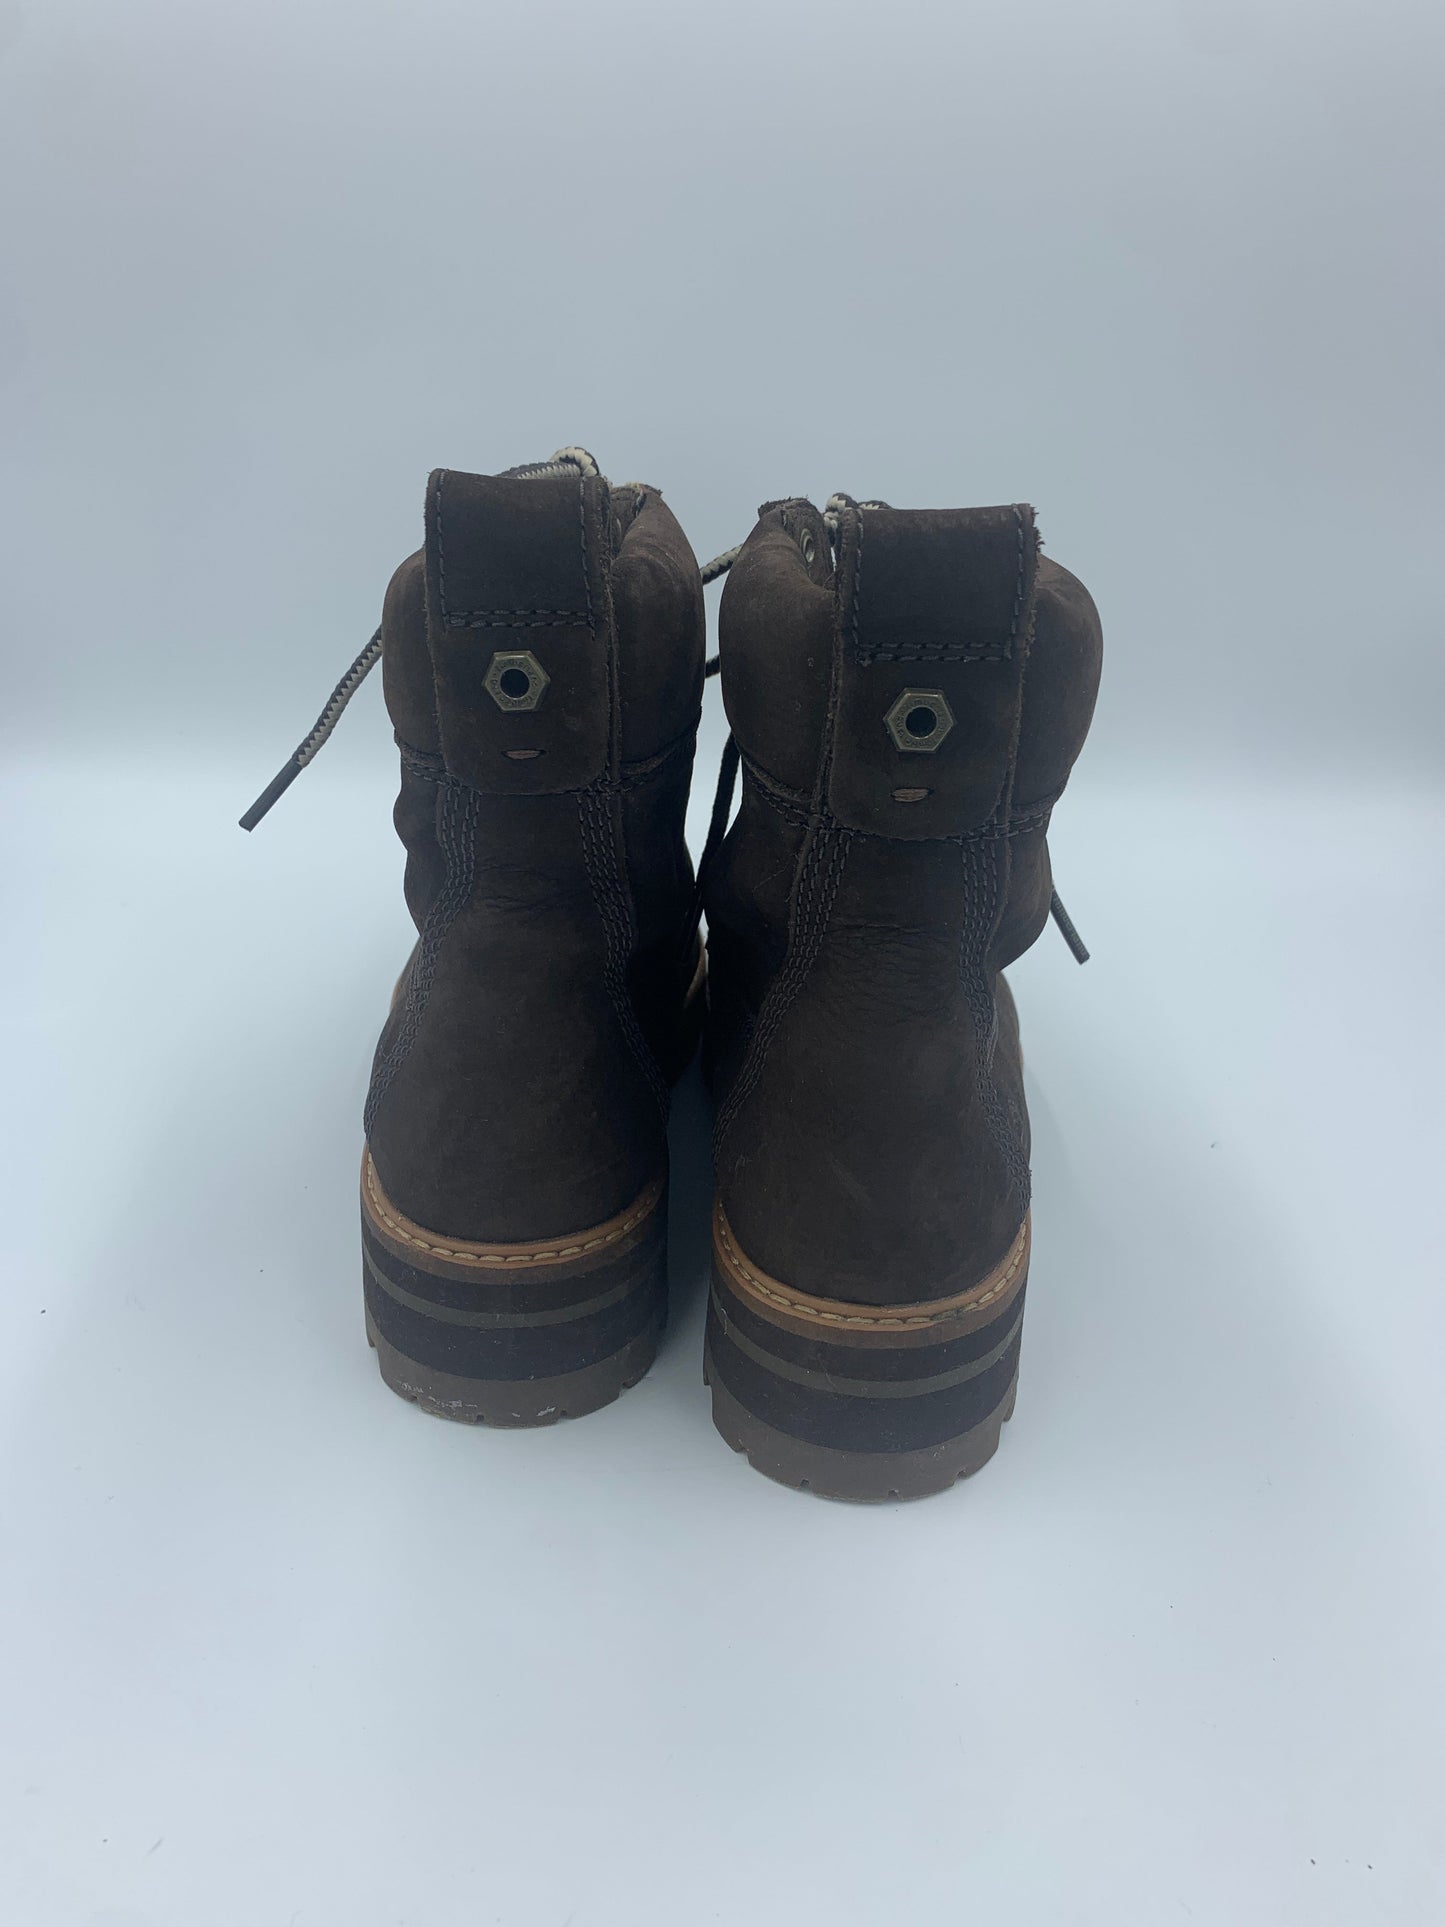 Brown Boots Designer Timberland, Size 7